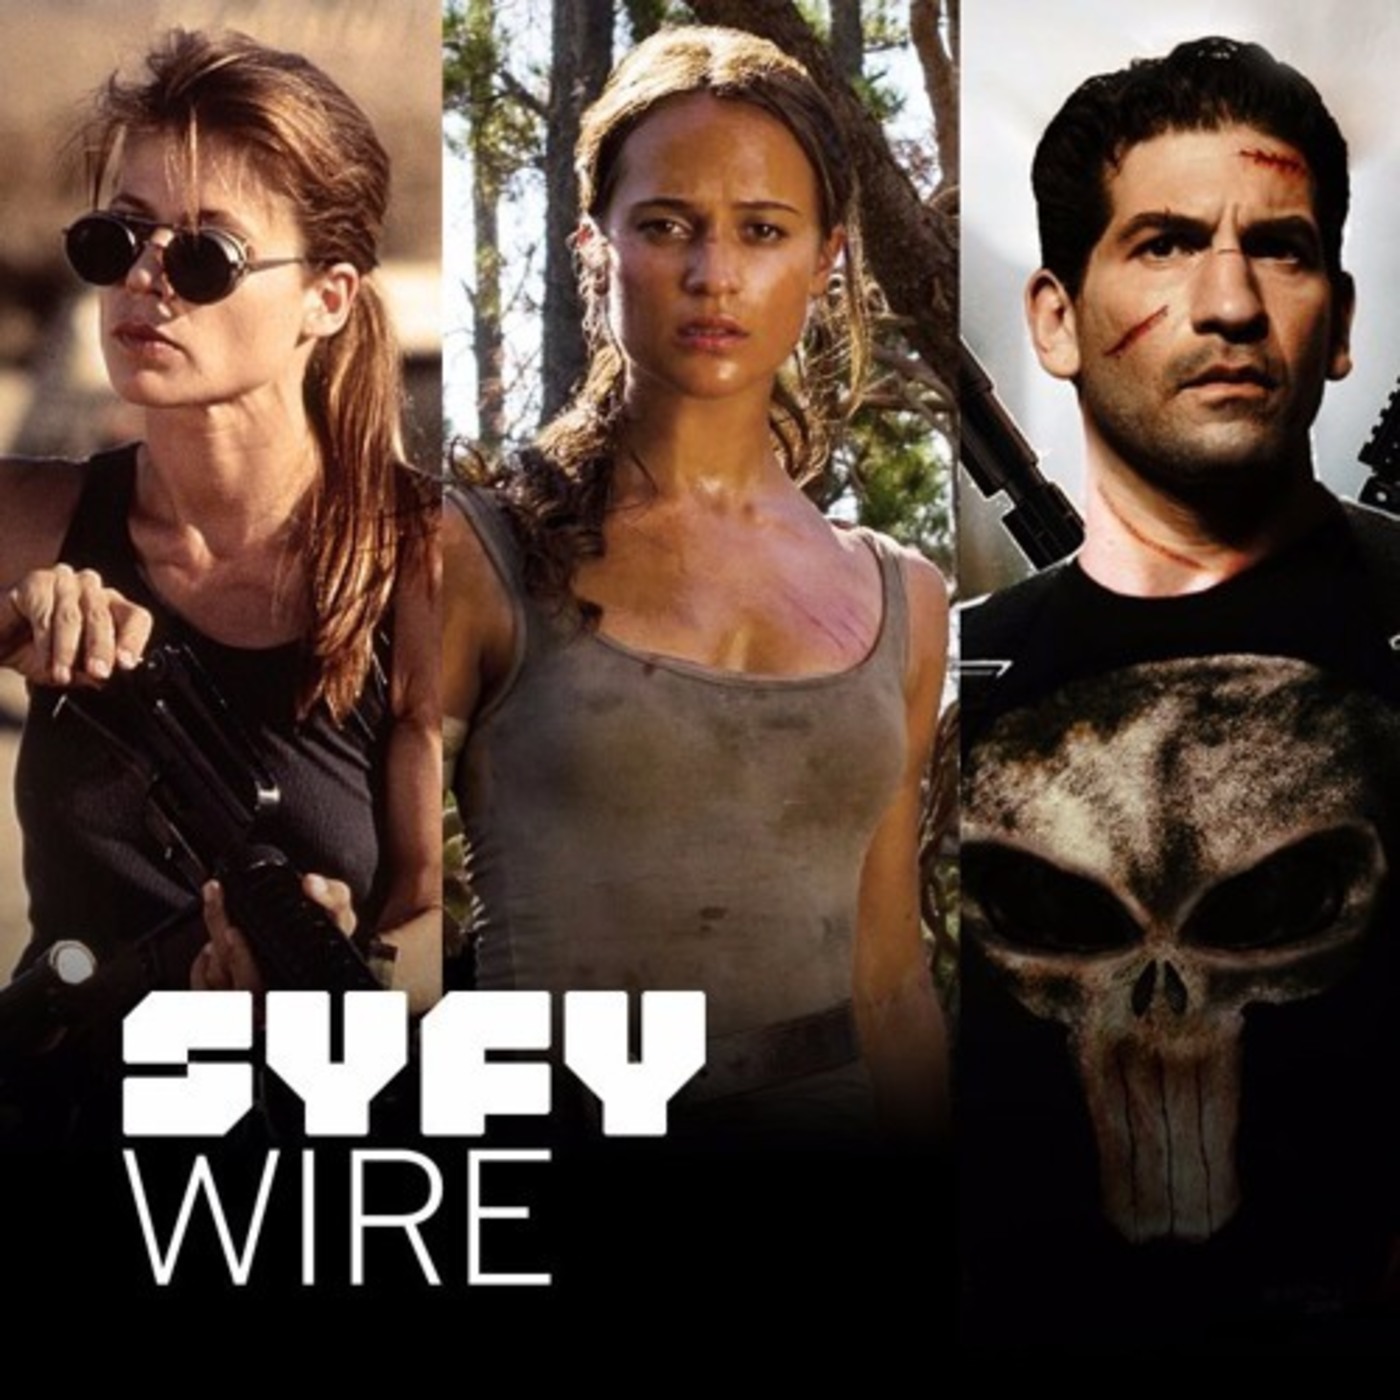 Who Won the Week Episode 94: Terminator, Tomb Raider, The Punisher, and more! by Syfy Wire